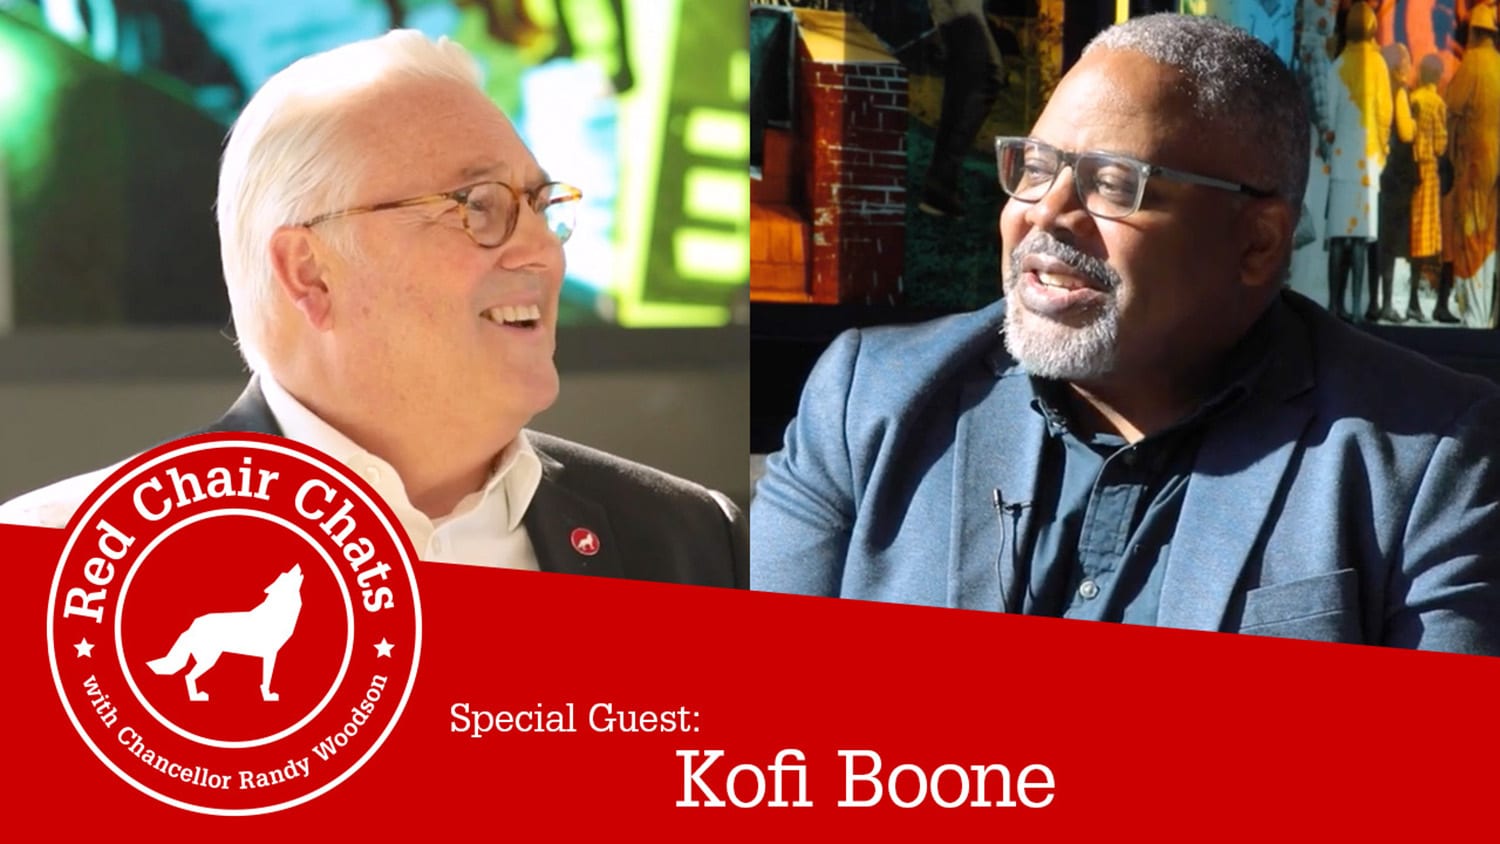 In episode 5 of Red Chair Chats, Chancellor Randy Woodson sits down with Kofi Boone, a distinguished professor of landscape architecture in NC State's College of Design.